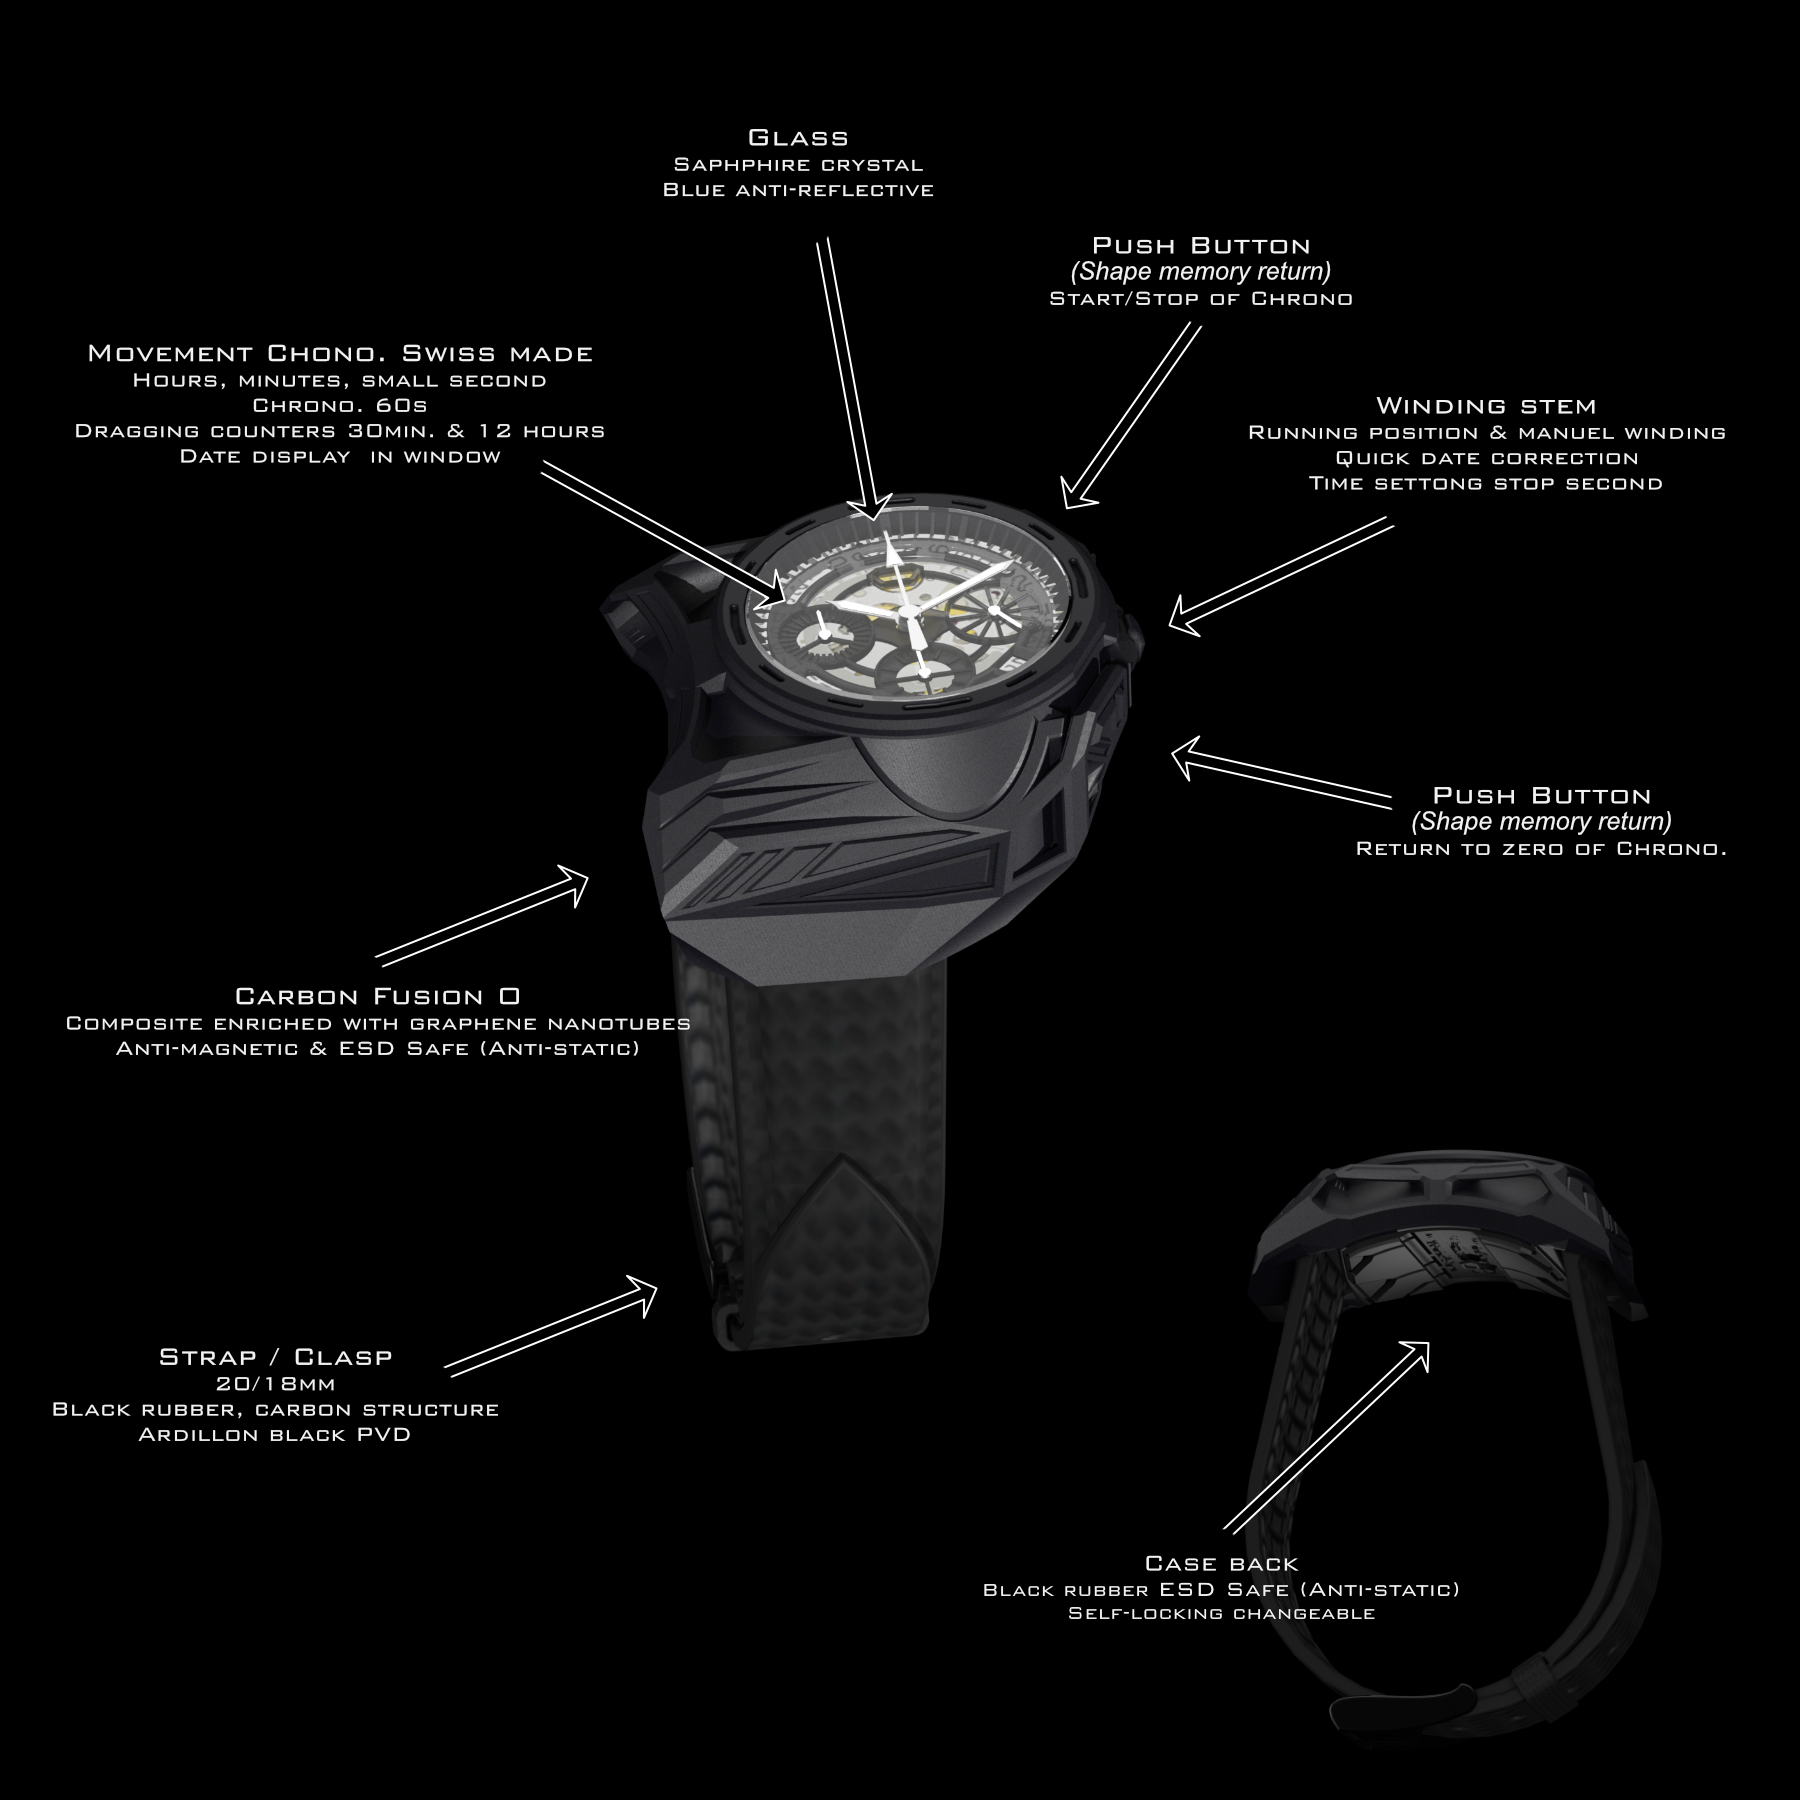 Pilot 1 Chronograph IMG specifications